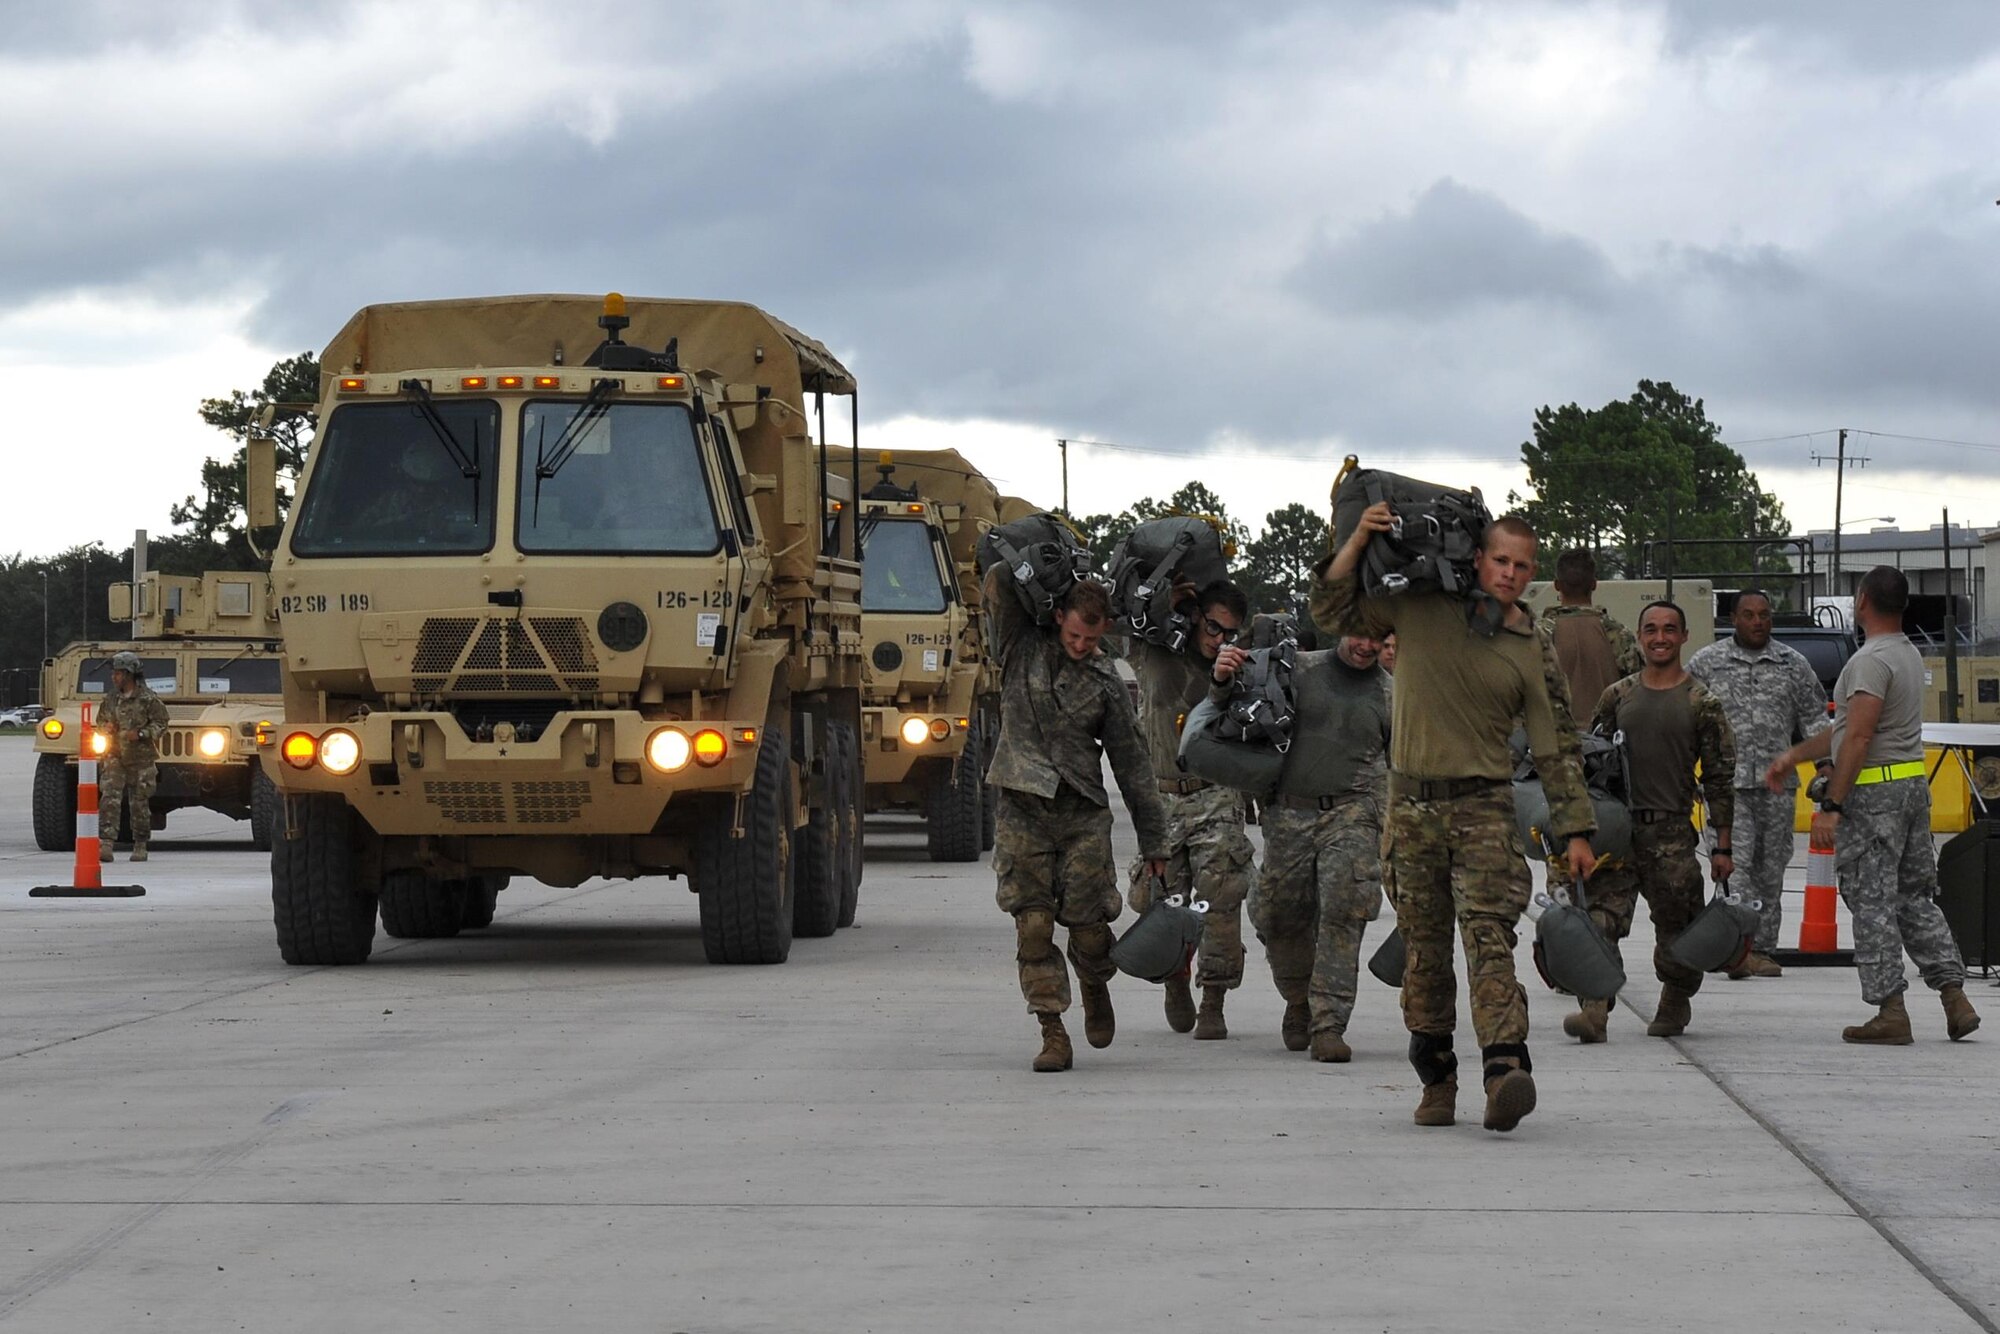 U.S. Army soldiers assigned to the 3rd Brigade Combat Team, 82nd Airborne Division from Fort Bragg, N.C., arrive at an intermediate staging base Aug. 18, 2016, near Fort Polk, La. Approximately 750 paratroopers jumped from Air Mobility Command aircraft in support of Exercise Green Flag Little Rock 16-09. (U.S. Air Force photo by Airman Kevin Sommer Giron)